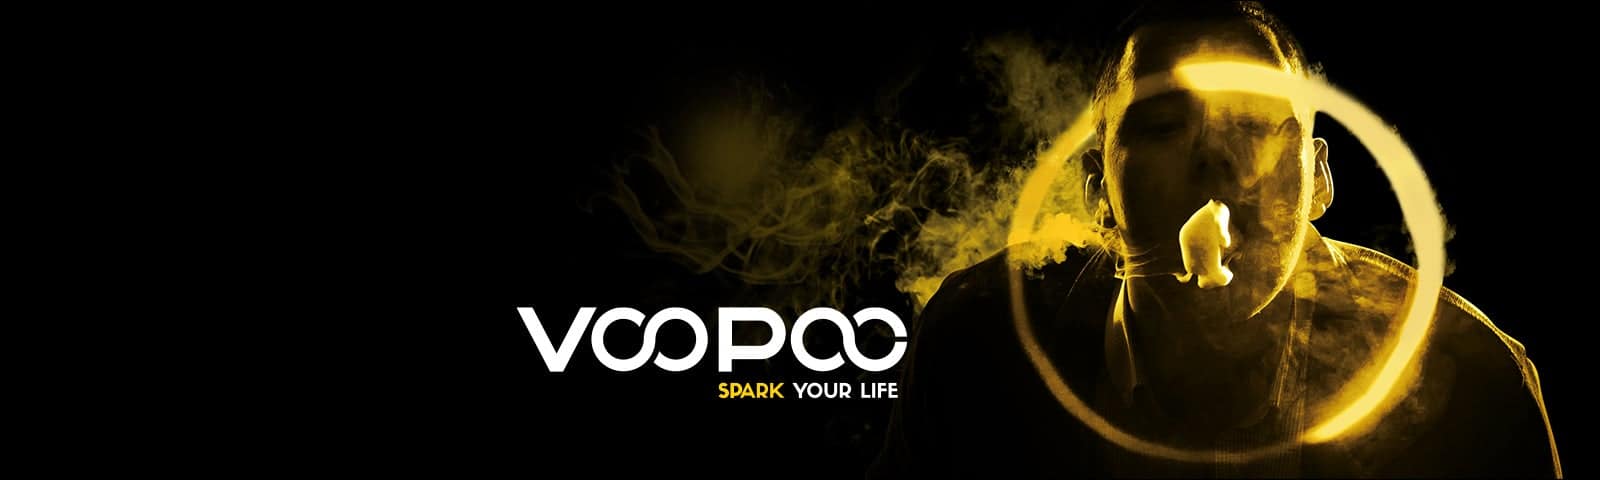 voopoo spark your life back vaping stop smoking